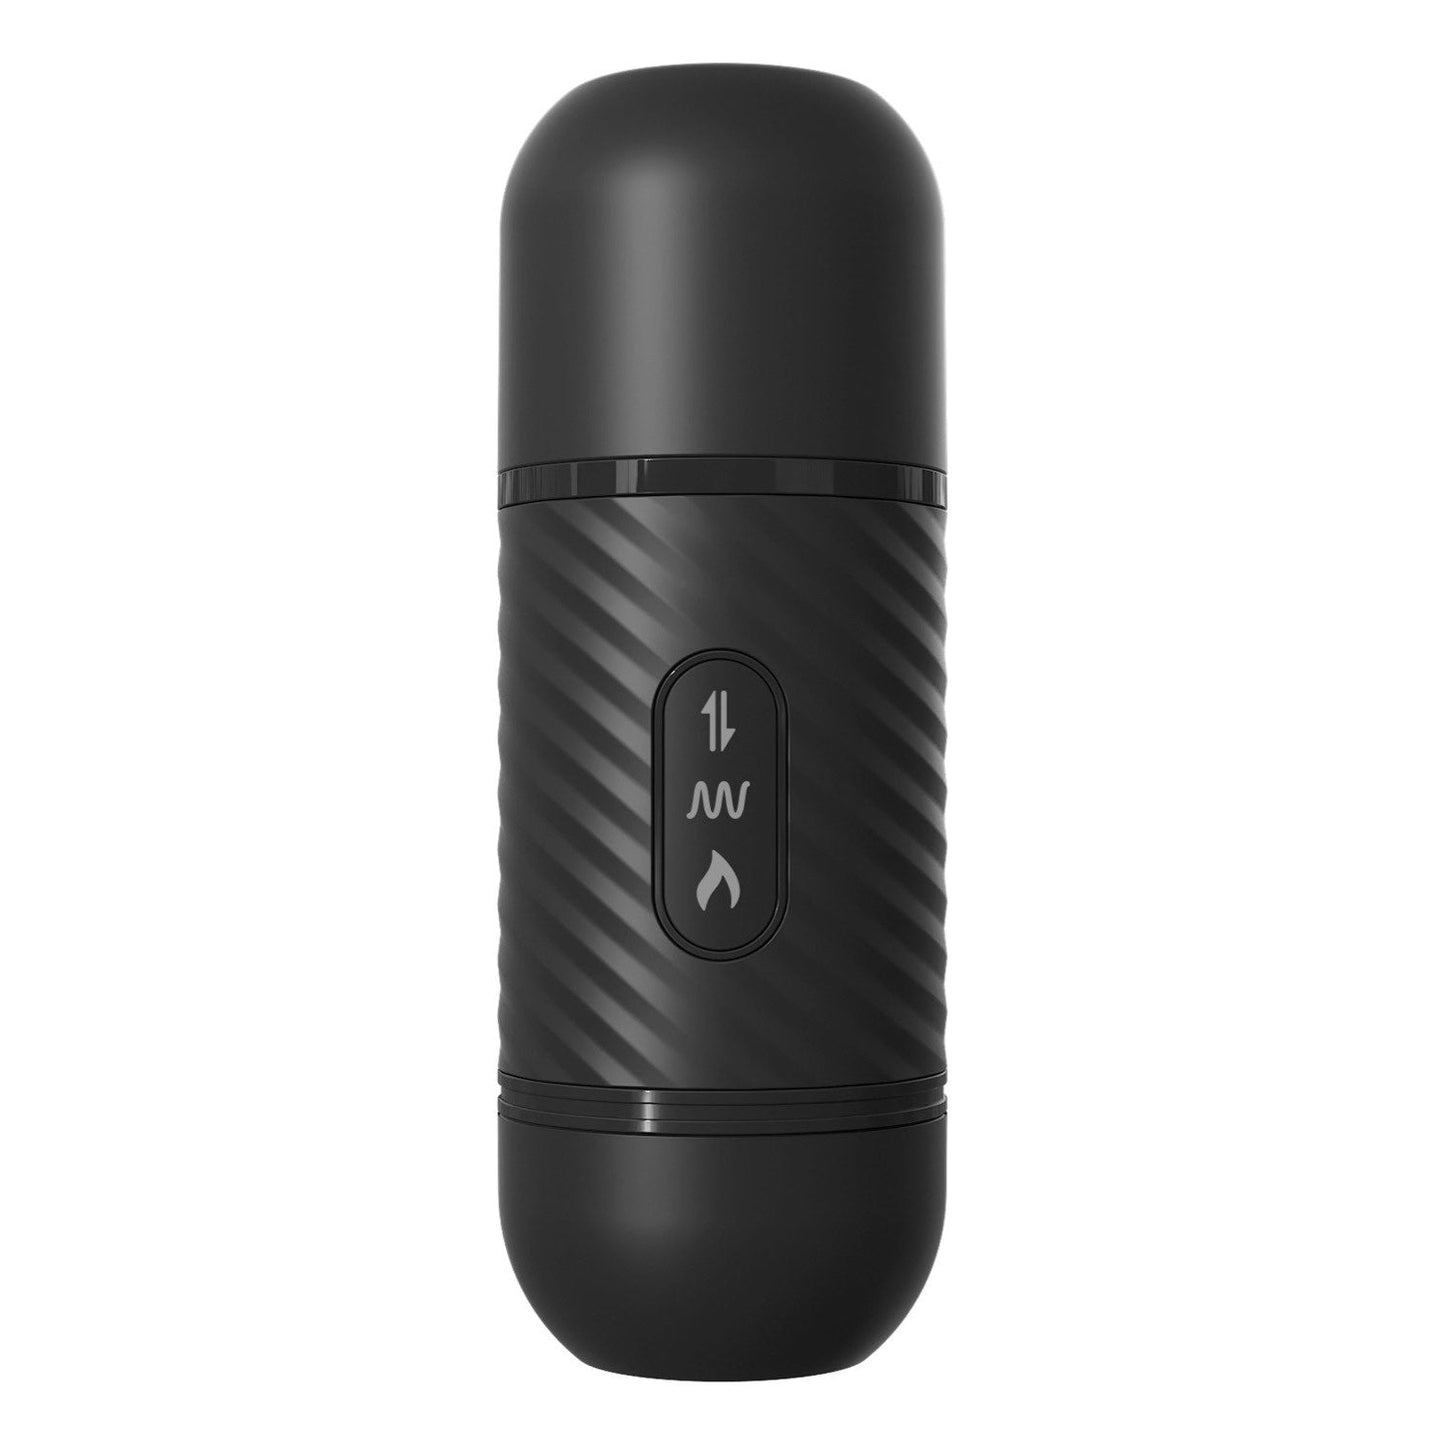 Collection Vibrating Ass Thruster - Black USB Rechargeable Vibrating & Thrusting Anal Vibrator